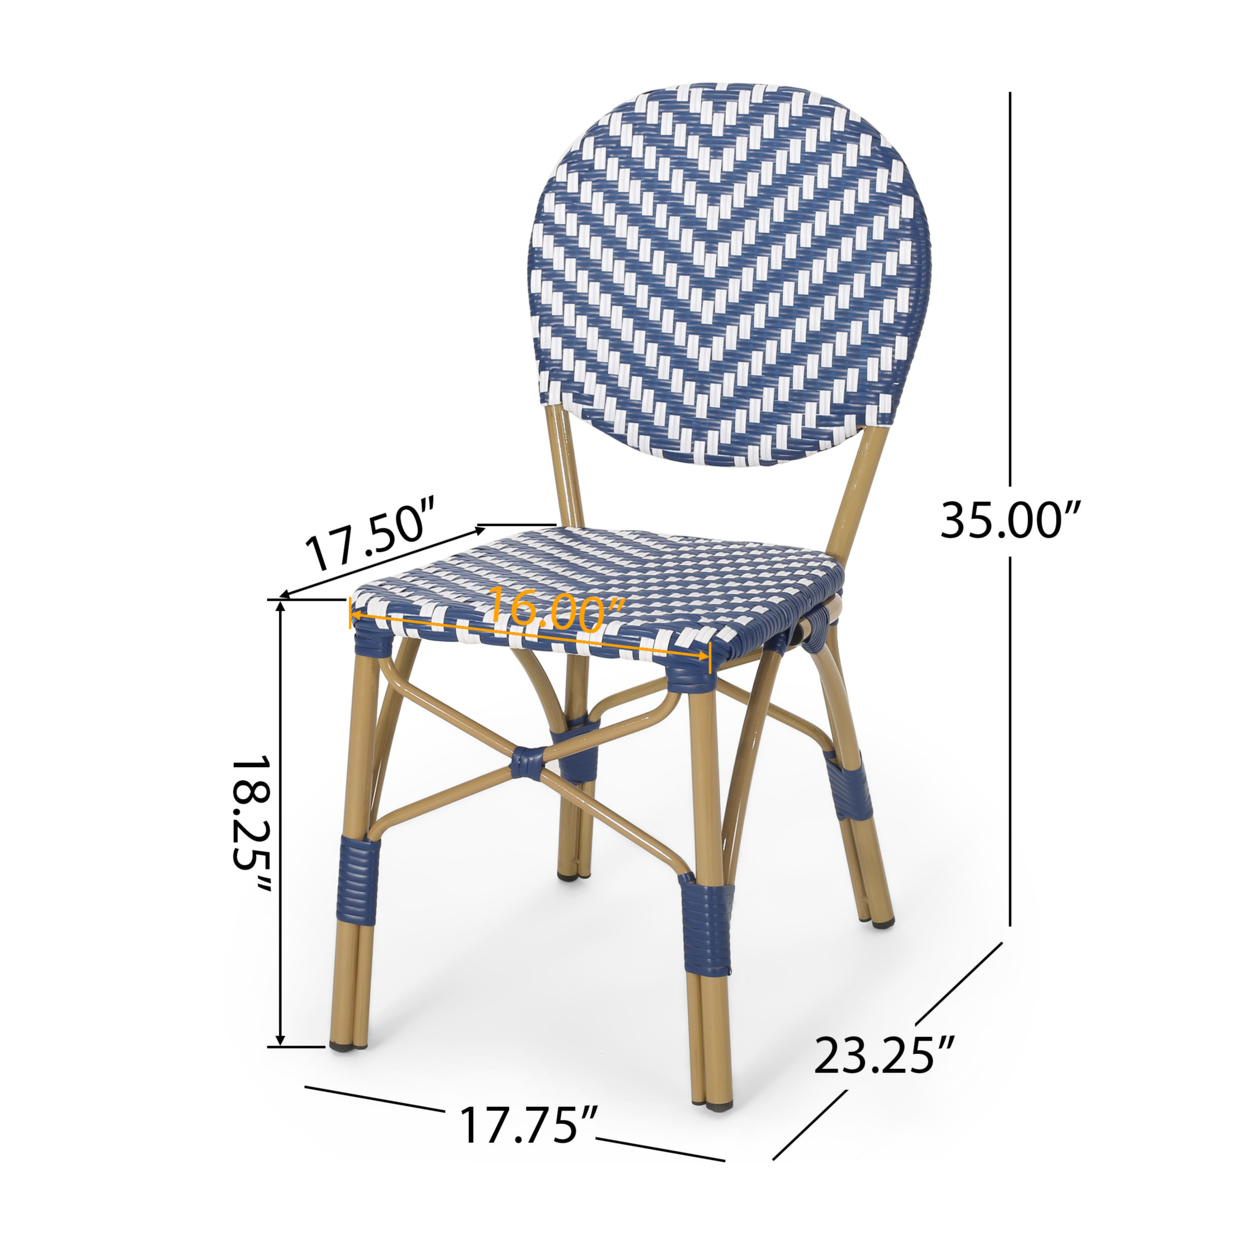 Deshler Outdoor Aluminum French Bistro Chairs, Set Of 2, Navy Blue, White, And Bamboo Finish